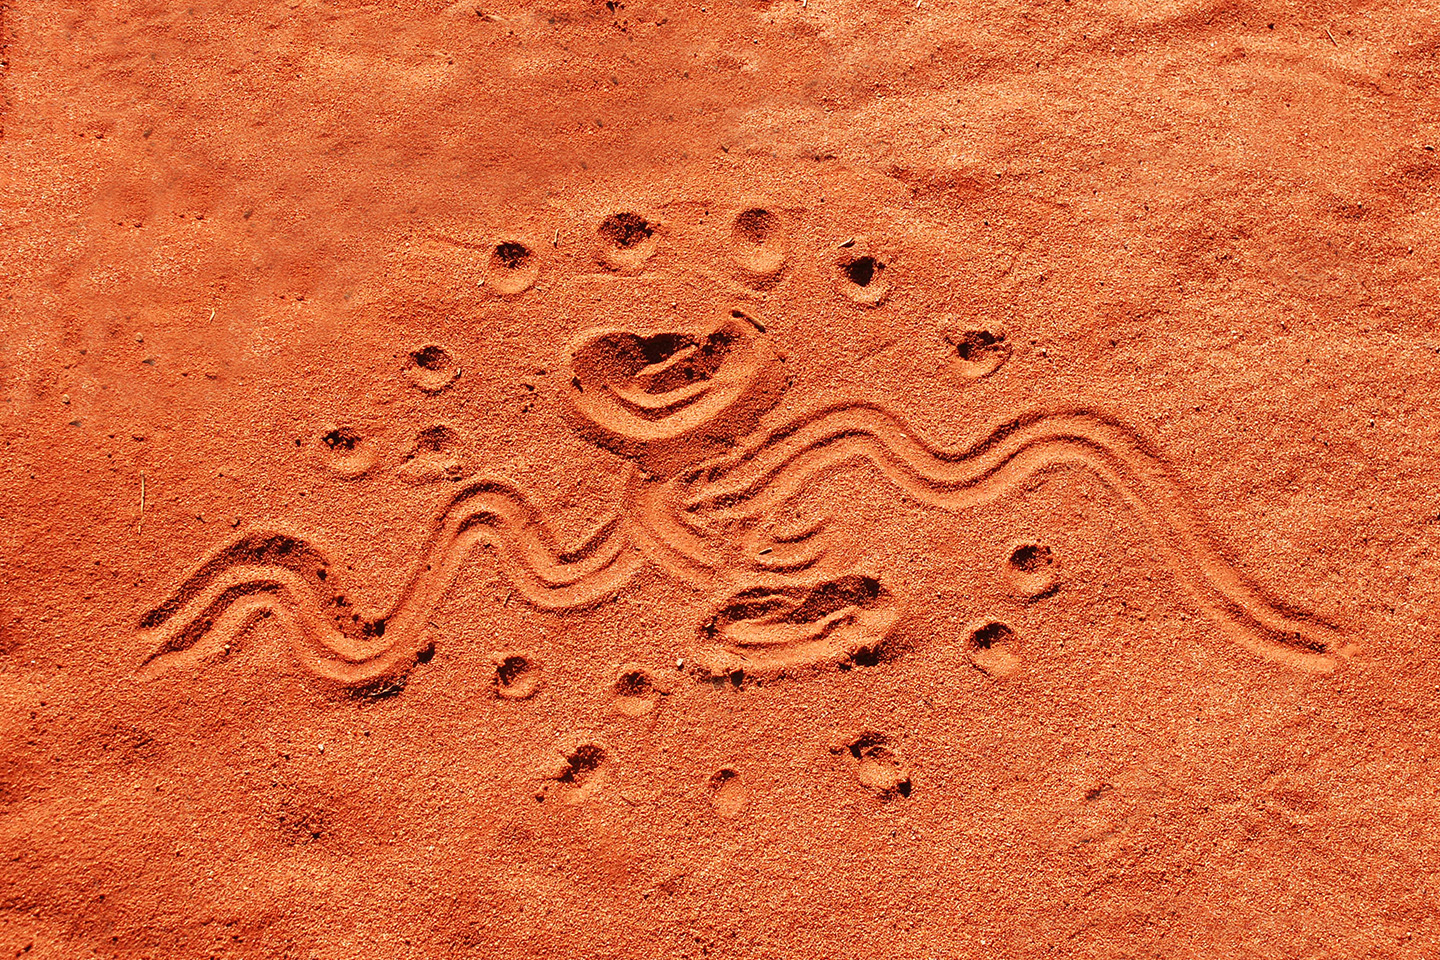 Australian Indigenous drawing etched into red sand